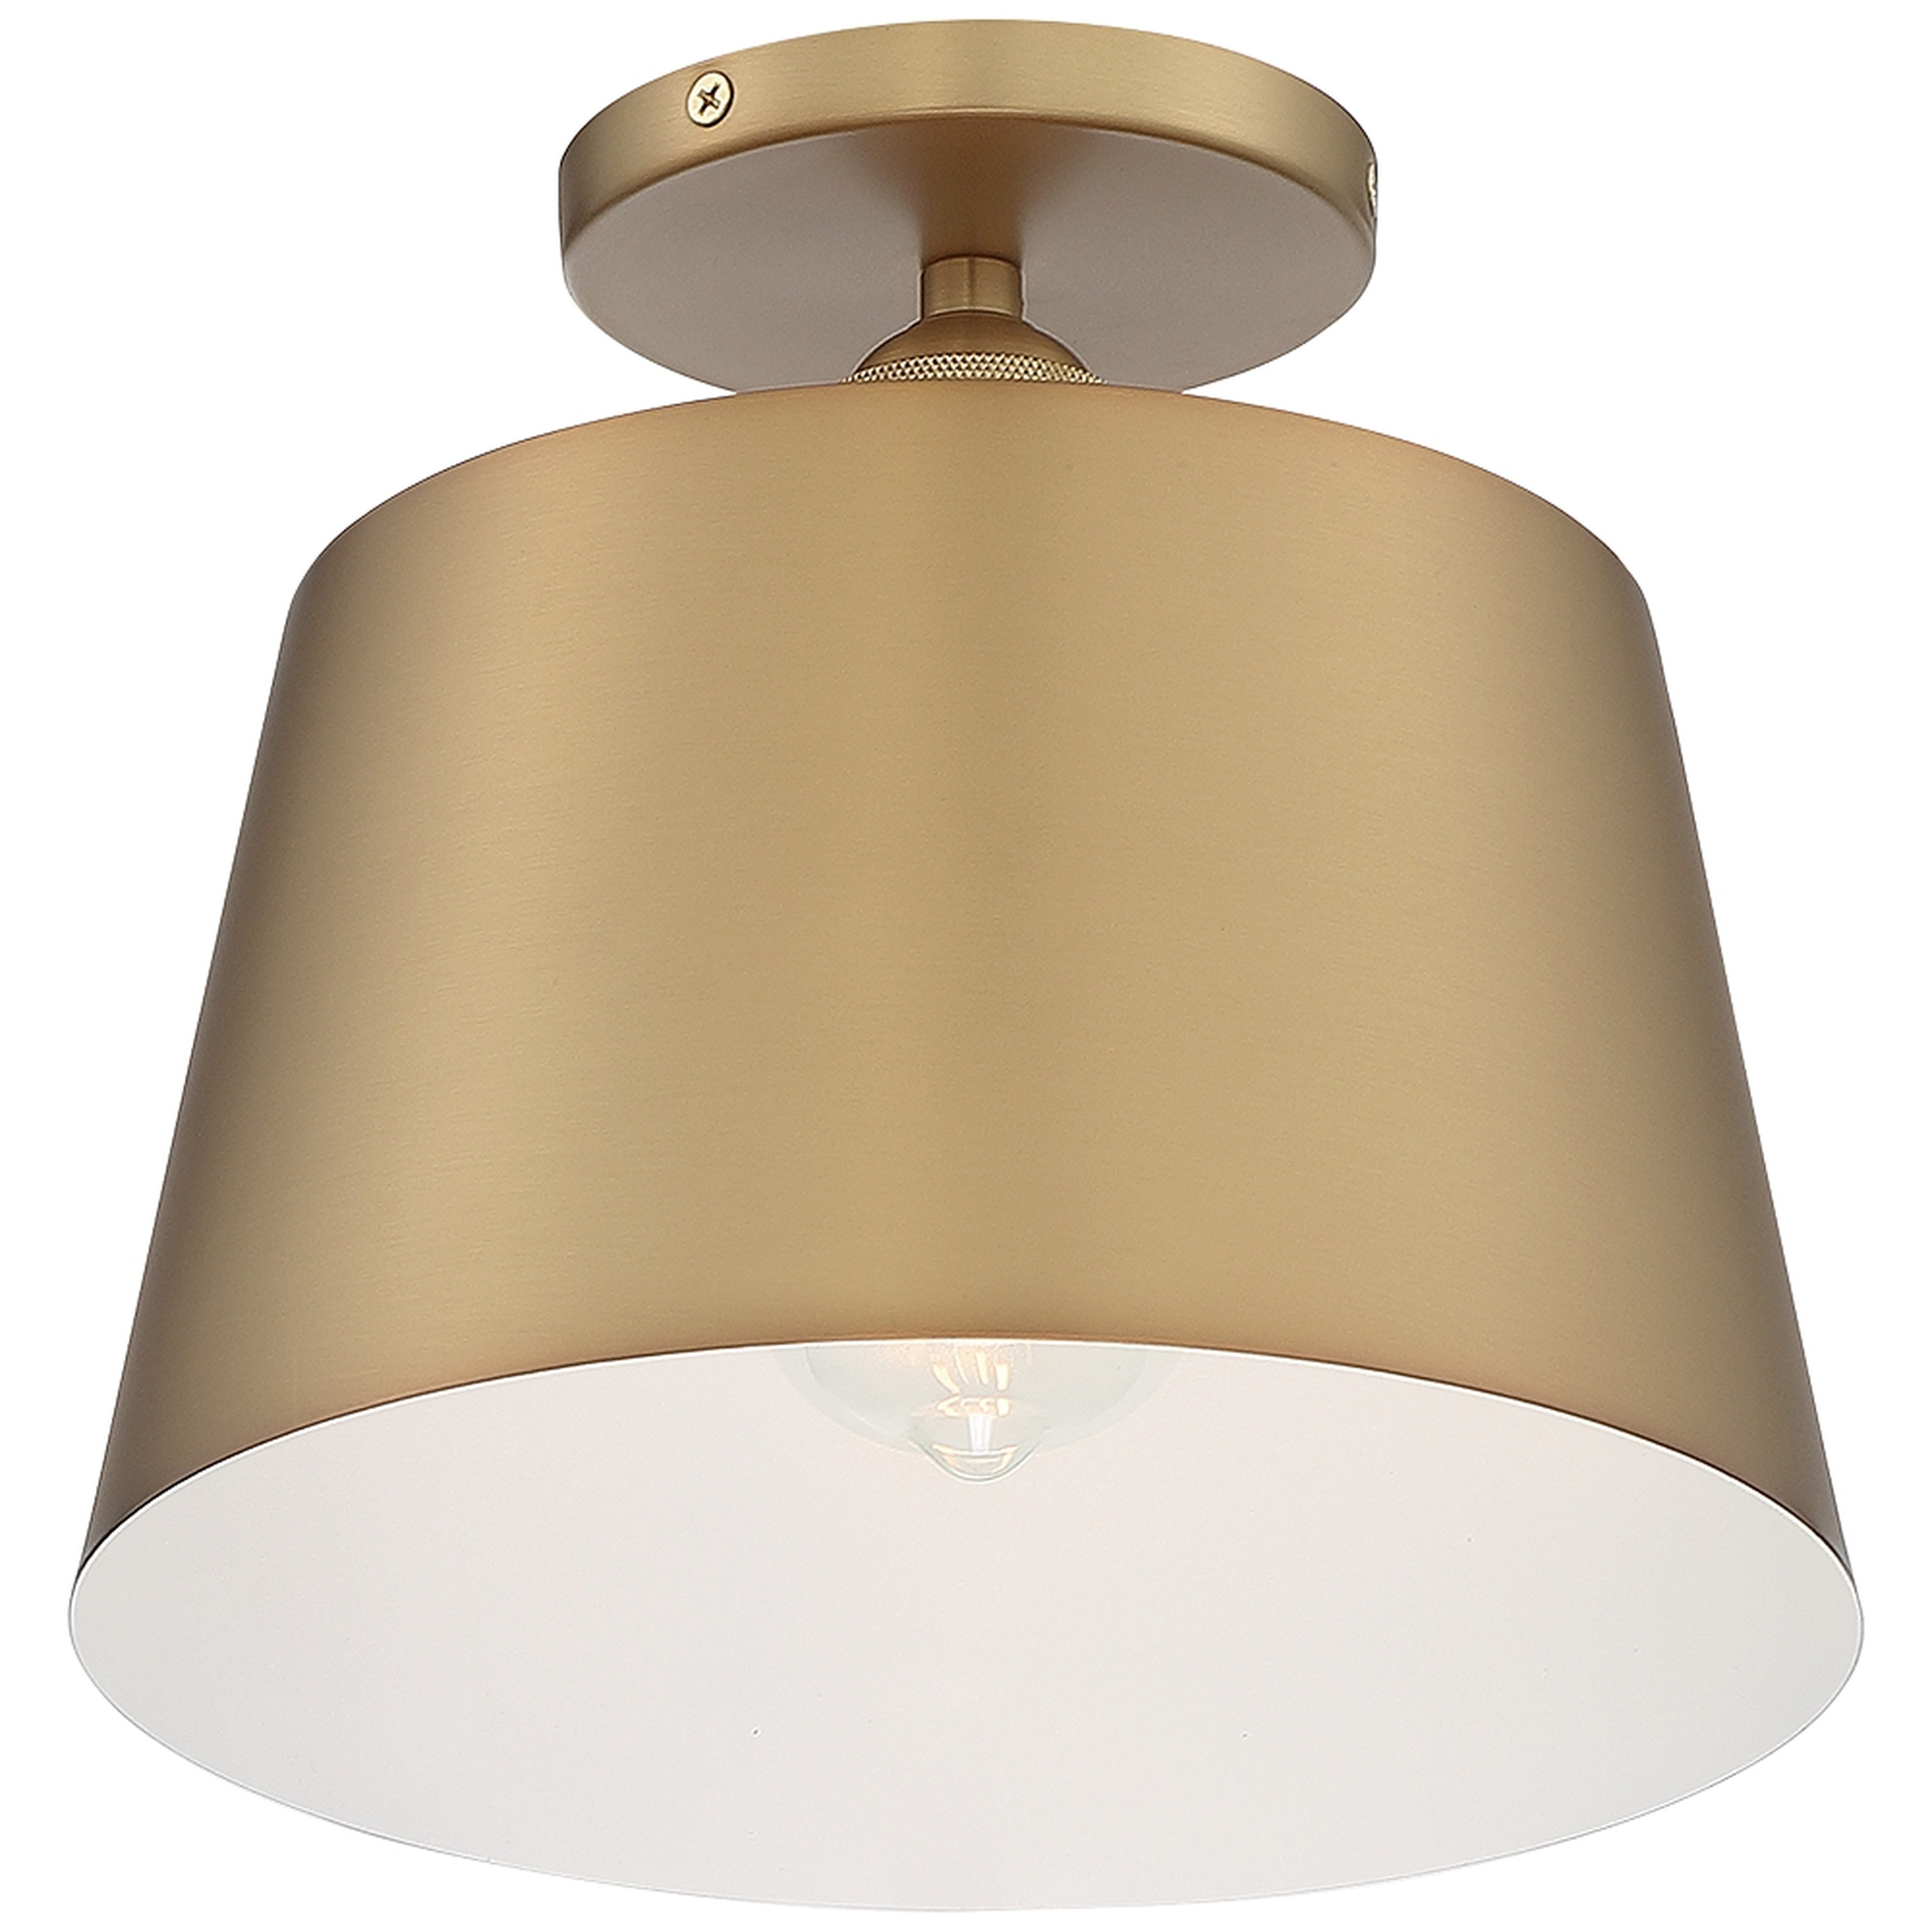 Satco Motif 10" Wide Brushed Brass and White Ceiling Light - Style # 99T01 - Lamps Plus